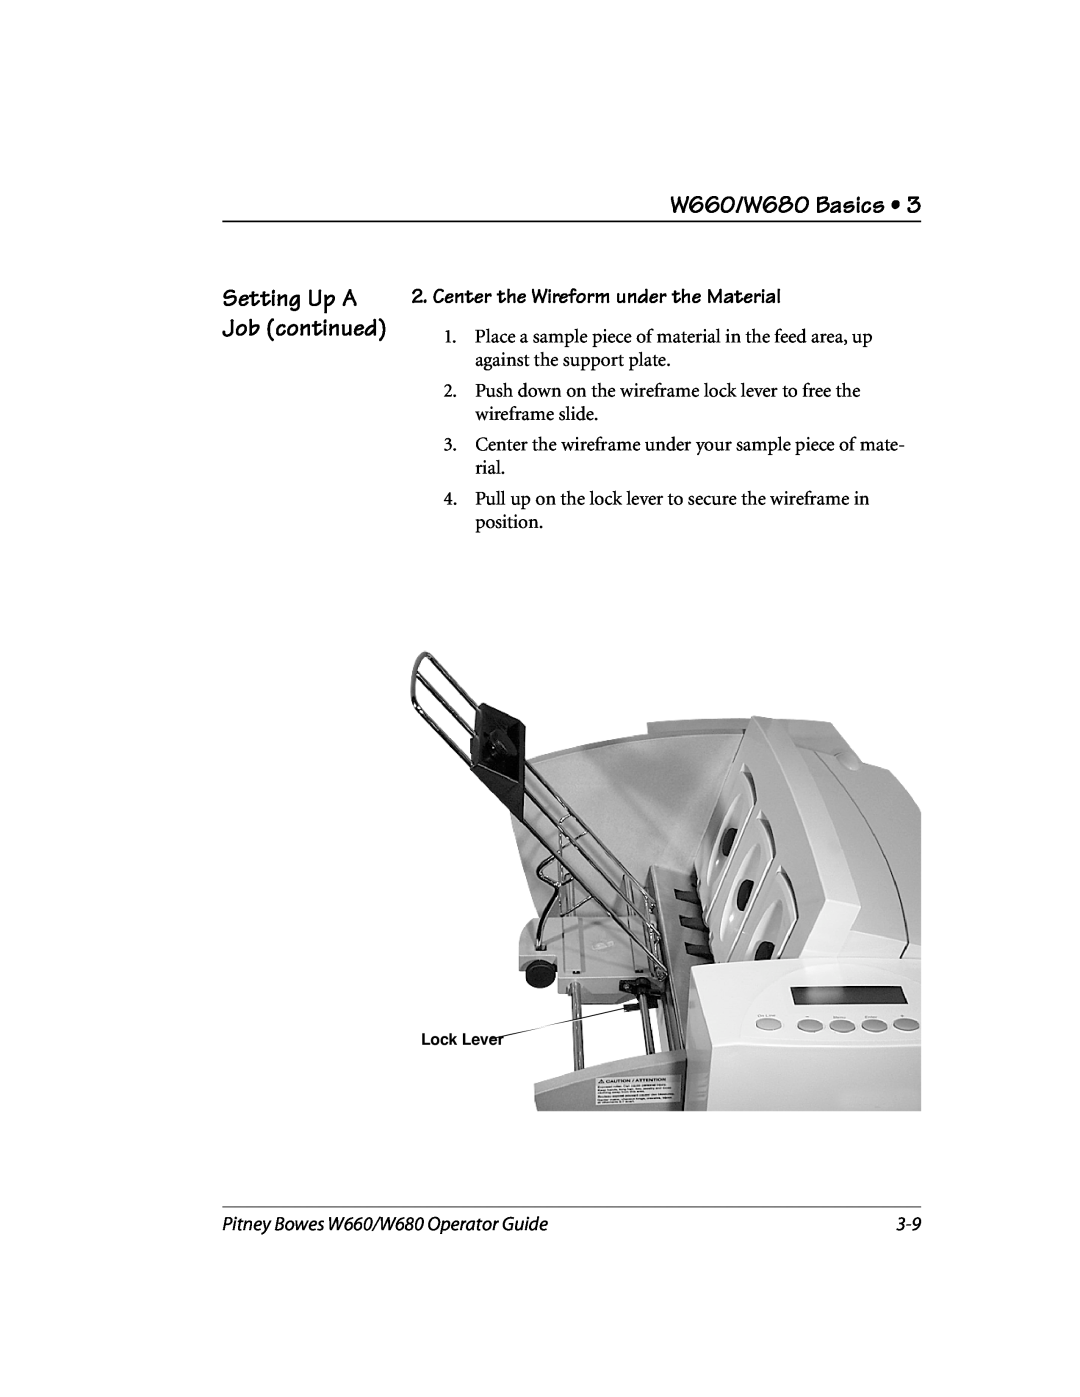 Pitney Bowes manual Center the Wireform under the Material, W660/W680 Basics, Setting Up A Job continued 